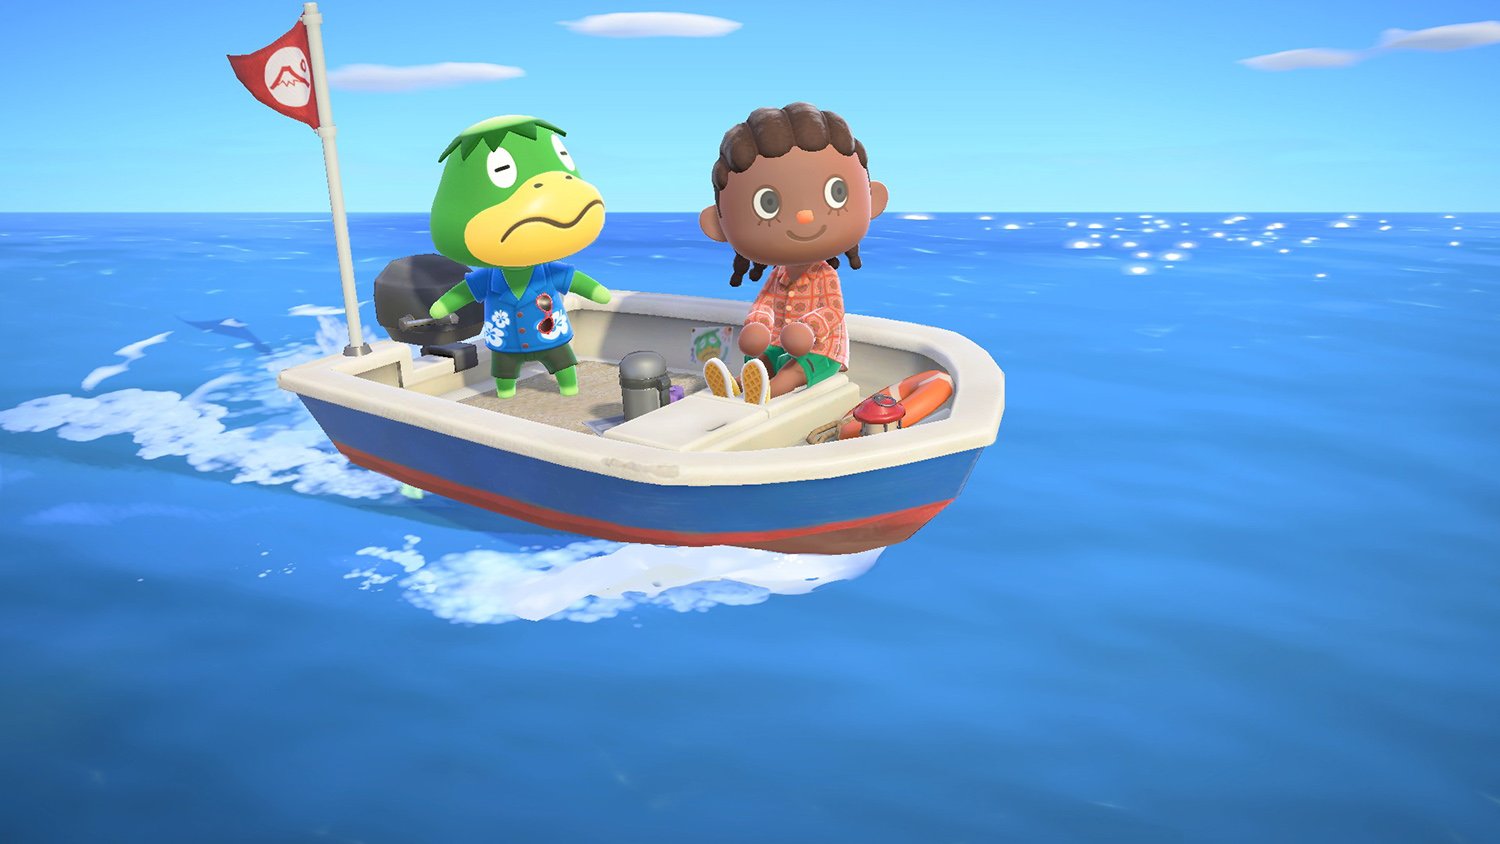 ‘Animal Crossing: New Horizons’: Kapp’n Has a Dark Connection to Japanese Folklore